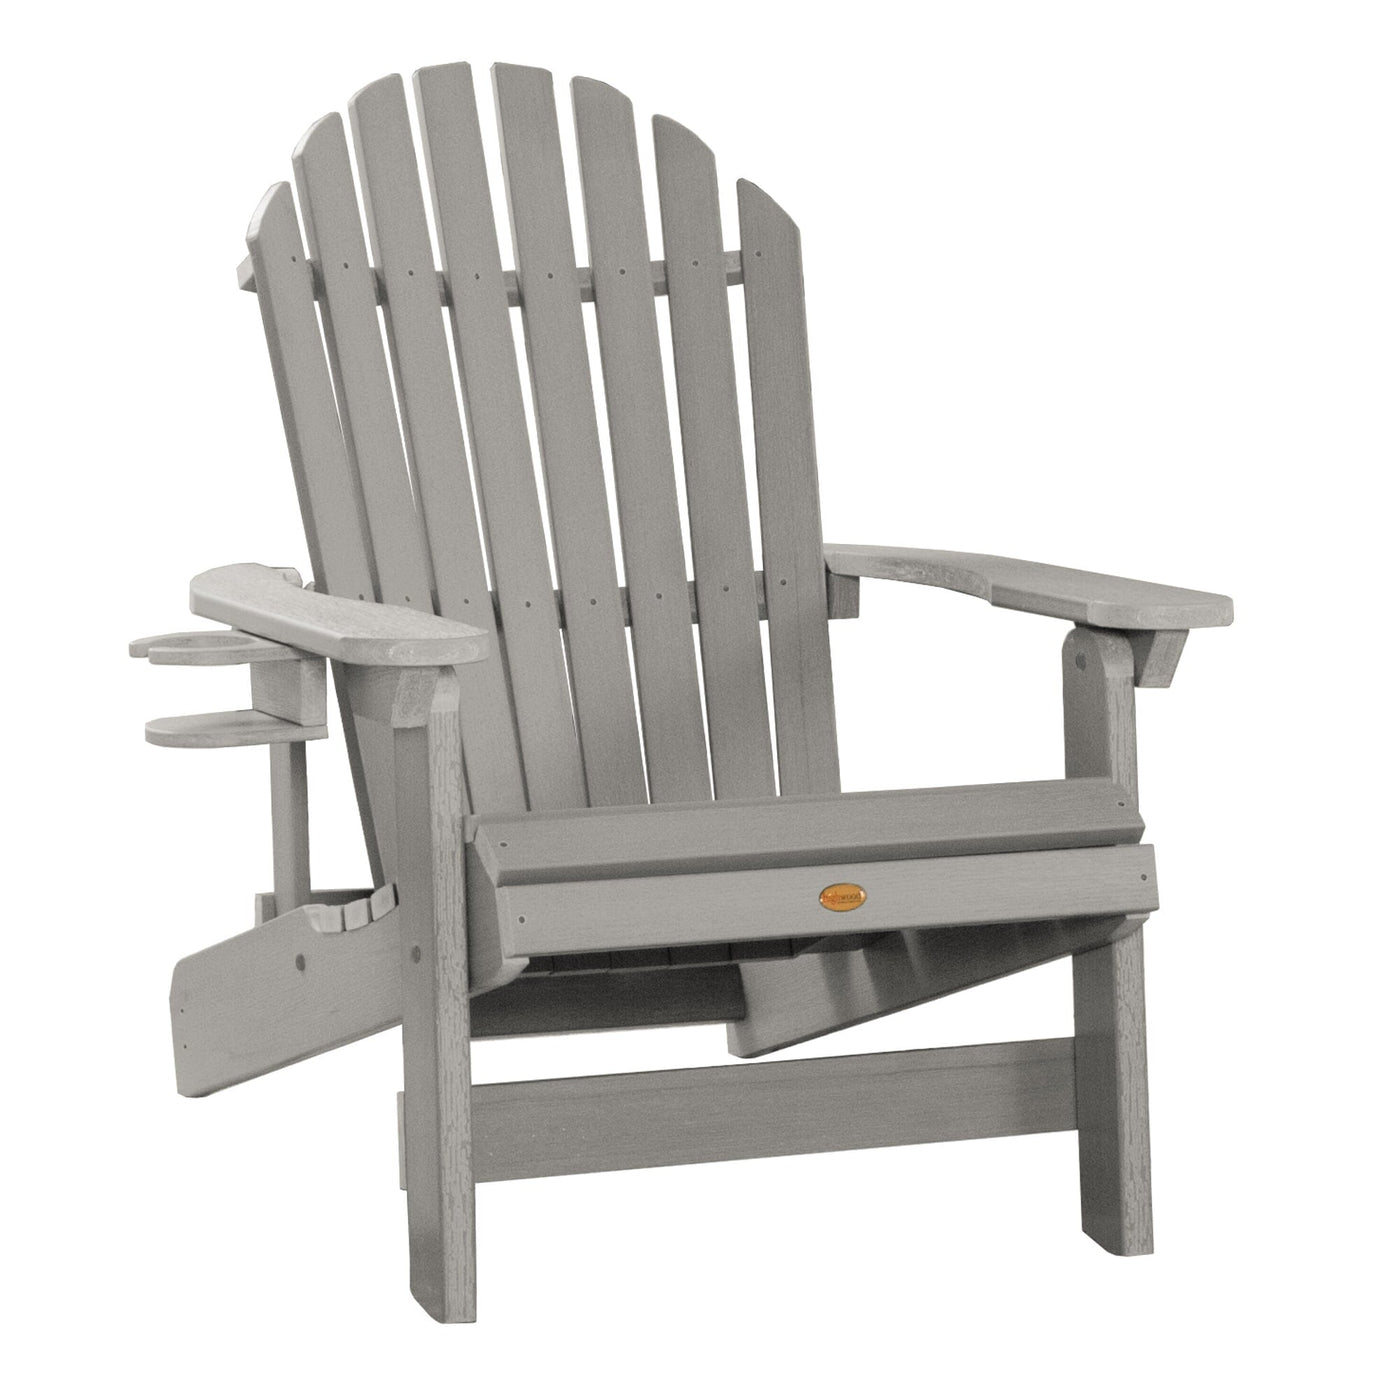 1 King Hamilton Folding and Reclining Adirondack Chair with 1 Easy-add Cup Holder Adirondack Chairs Highwood USA Harbor Gray 